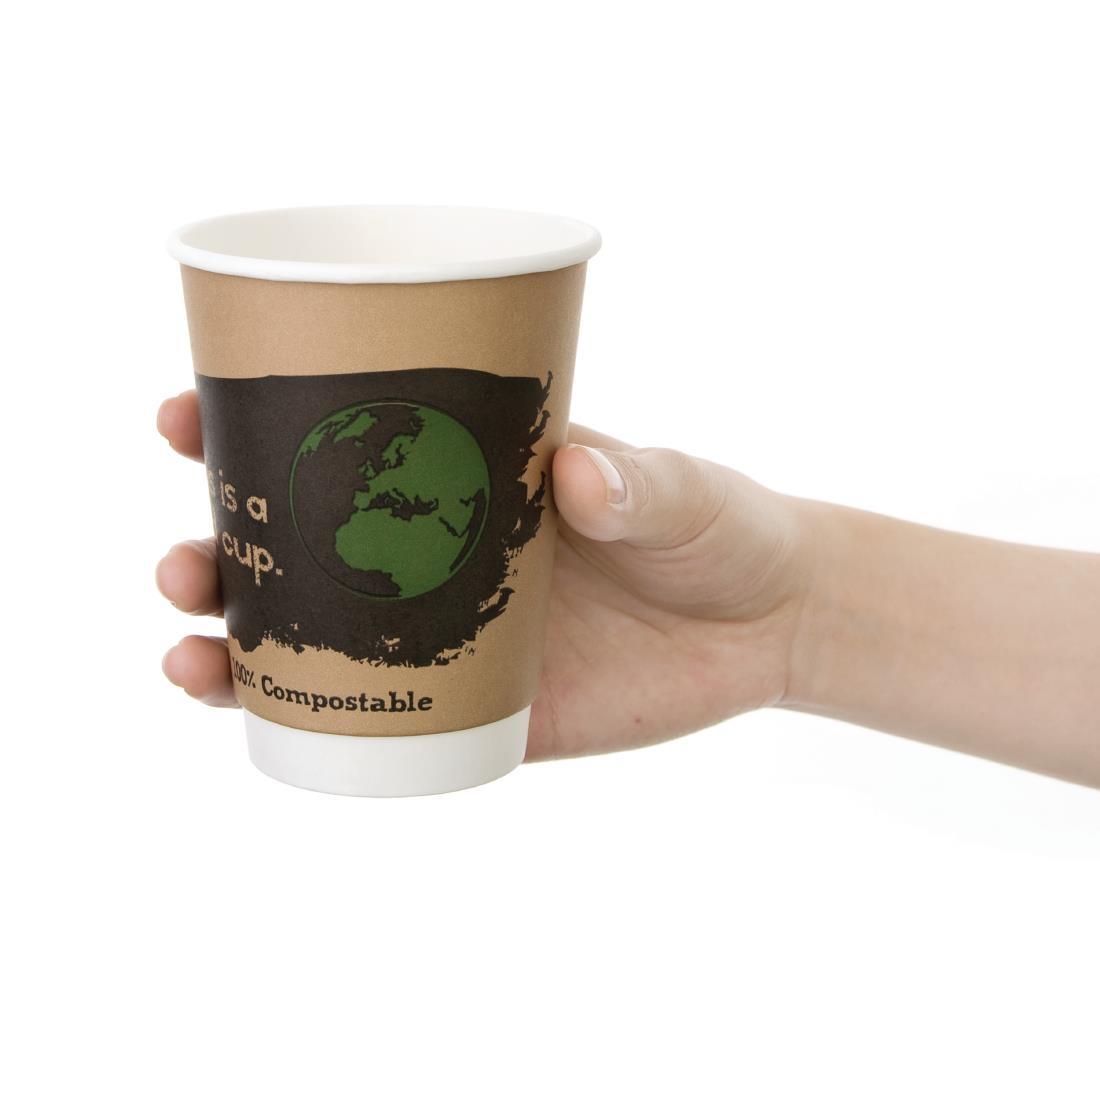 Fiesta Compostable Coffee Cups Double Wall 355ml / 12oz (Pack of 500) - DY987  - 4